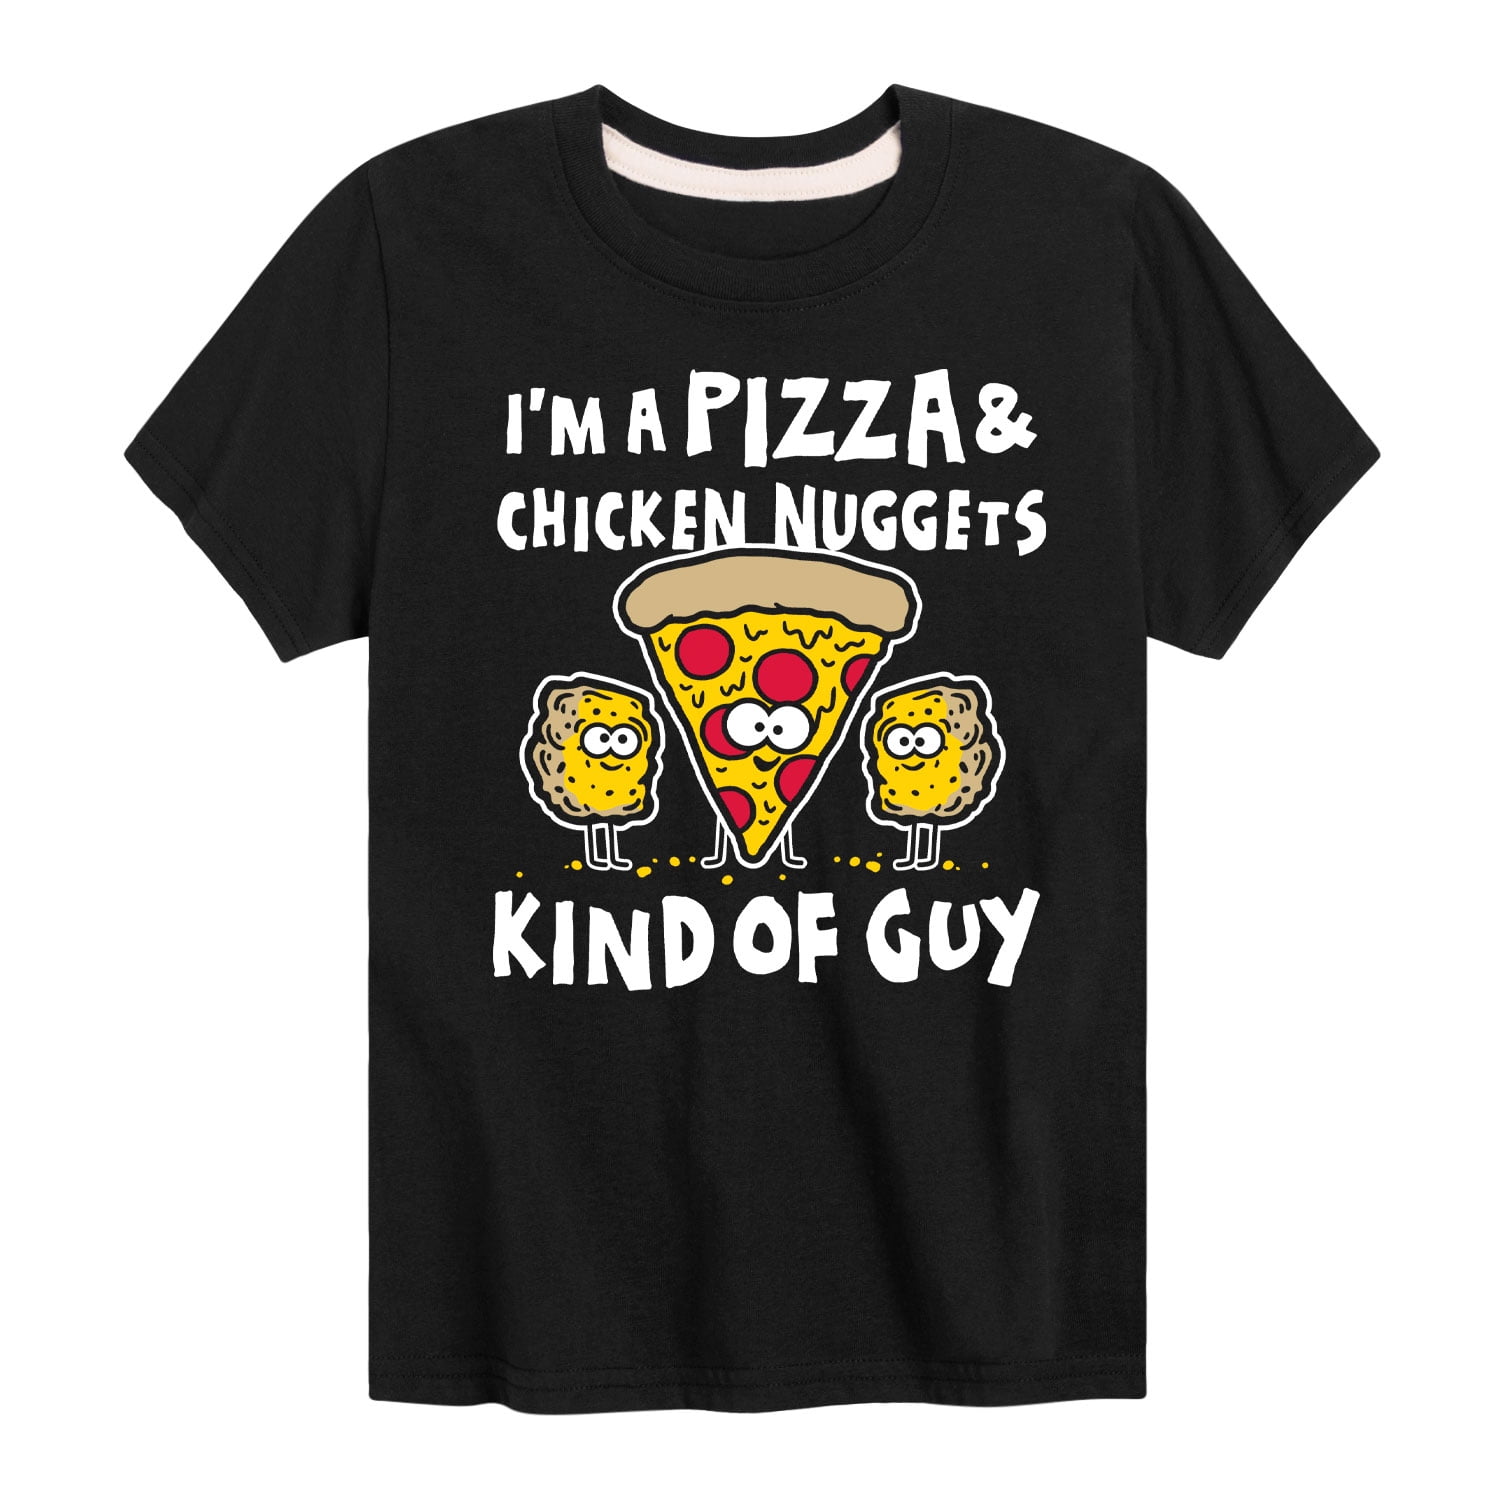 Funny Pizza Tee Shirt Kid's Food Tee Shirt Funny Chicken Nugget Shirt I'm A Pizza And Chicken Nugget Kind Of Guy Pizza Tshirts